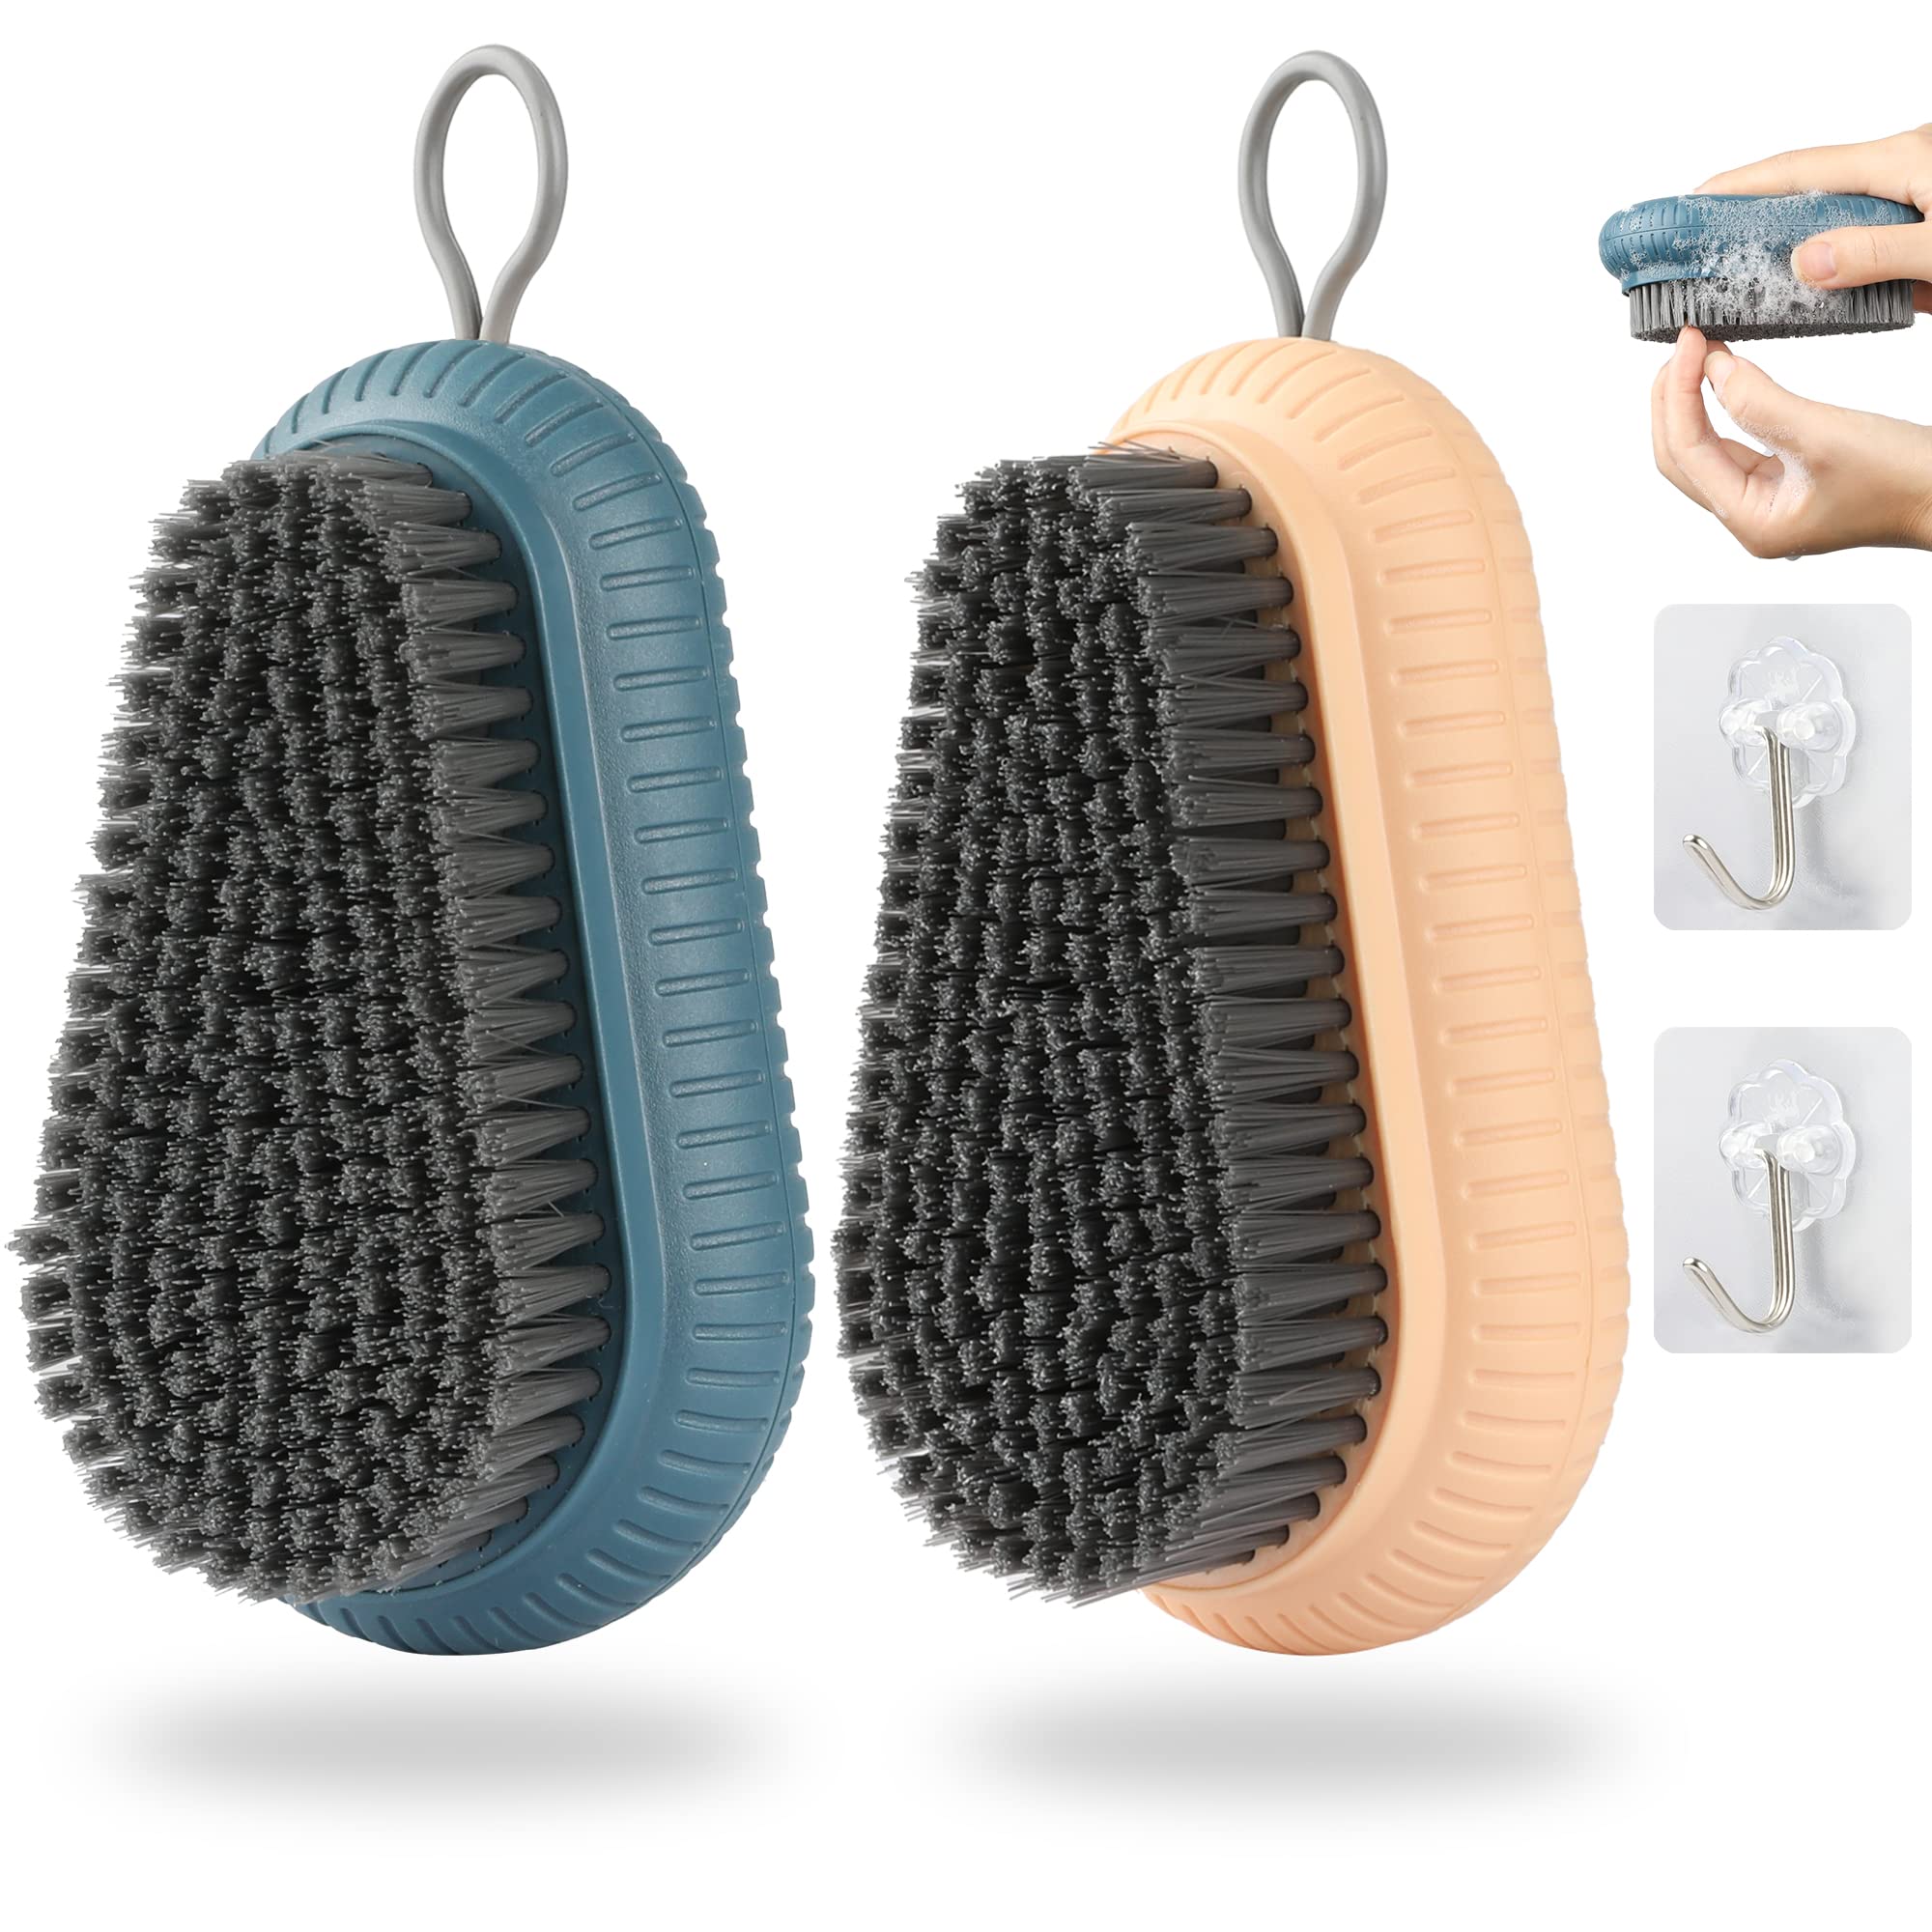 Scrub Brush Heavy Duty Scrubbing Brushes With Comfortable Grip For